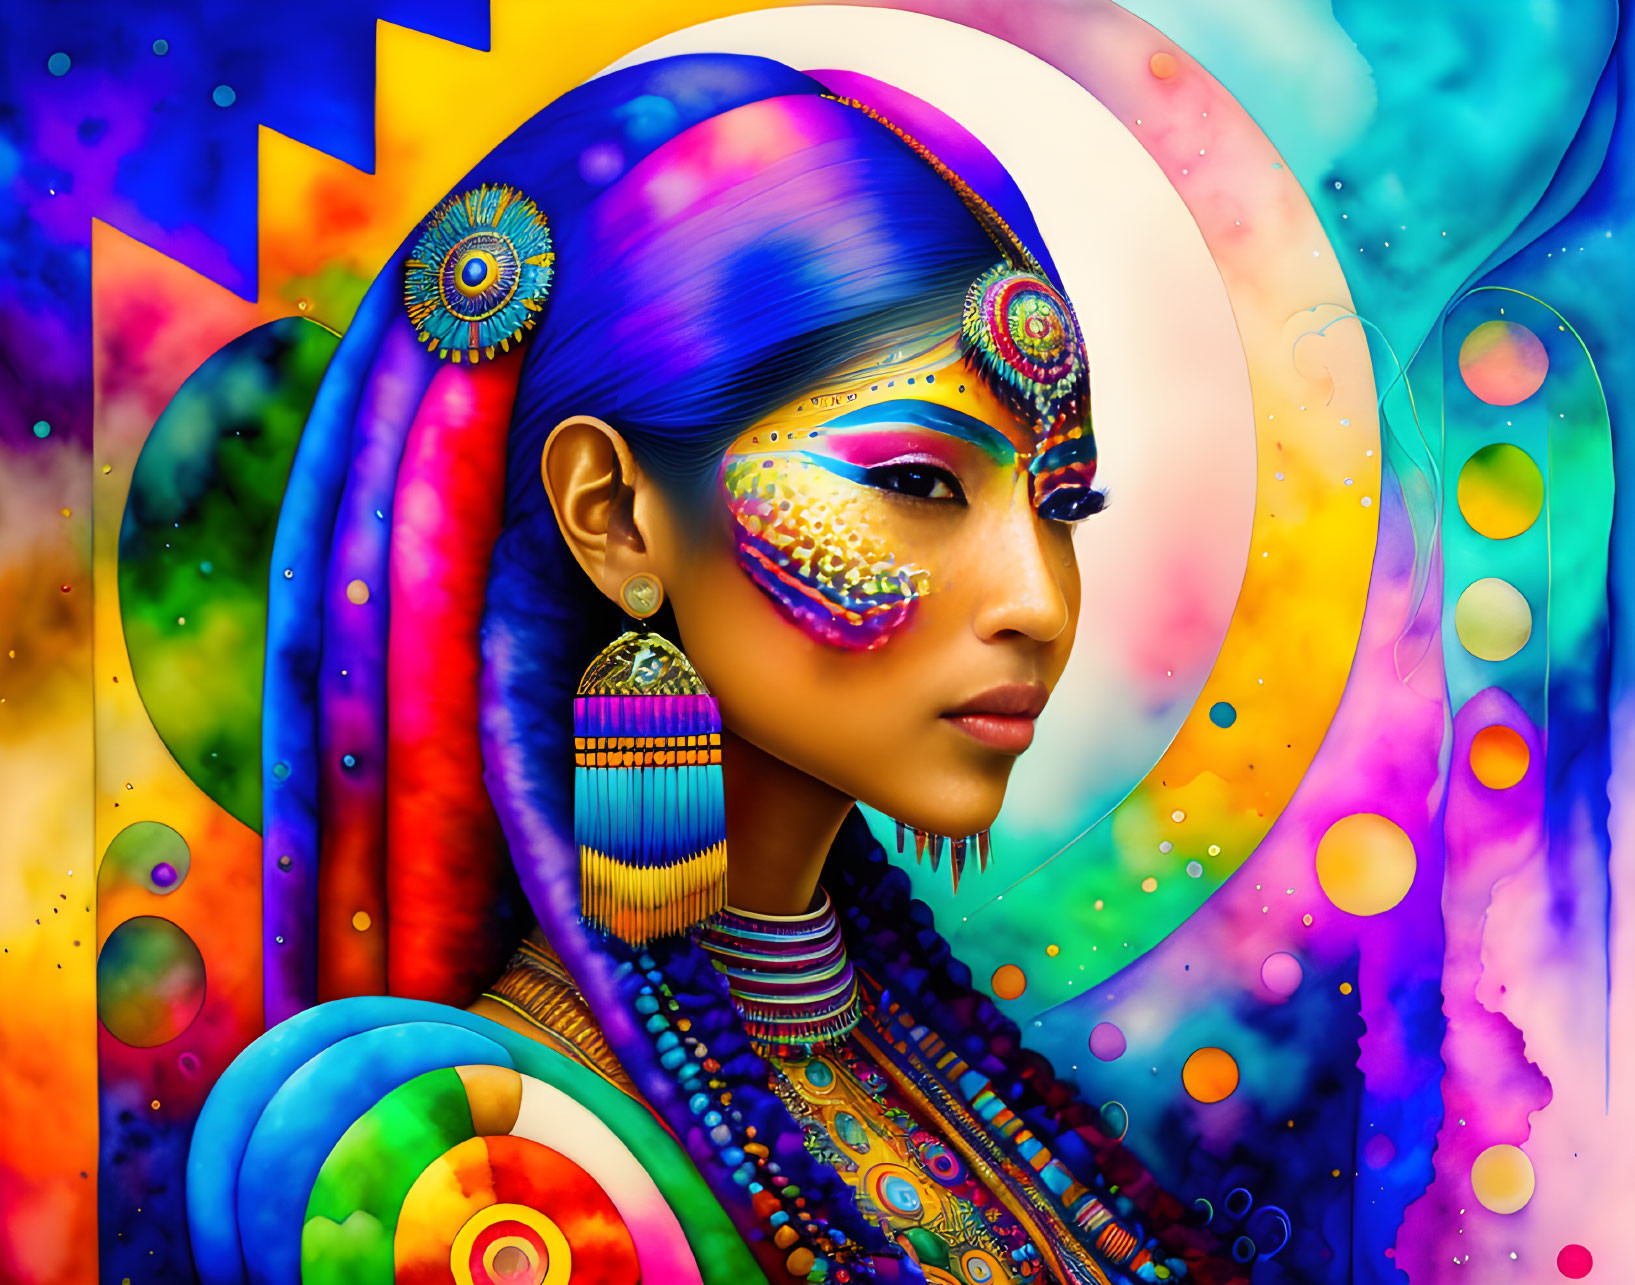 Colorful Digital Art: Woman with Vibrant Makeup and Jewelry on Abstract Psychedelic Background